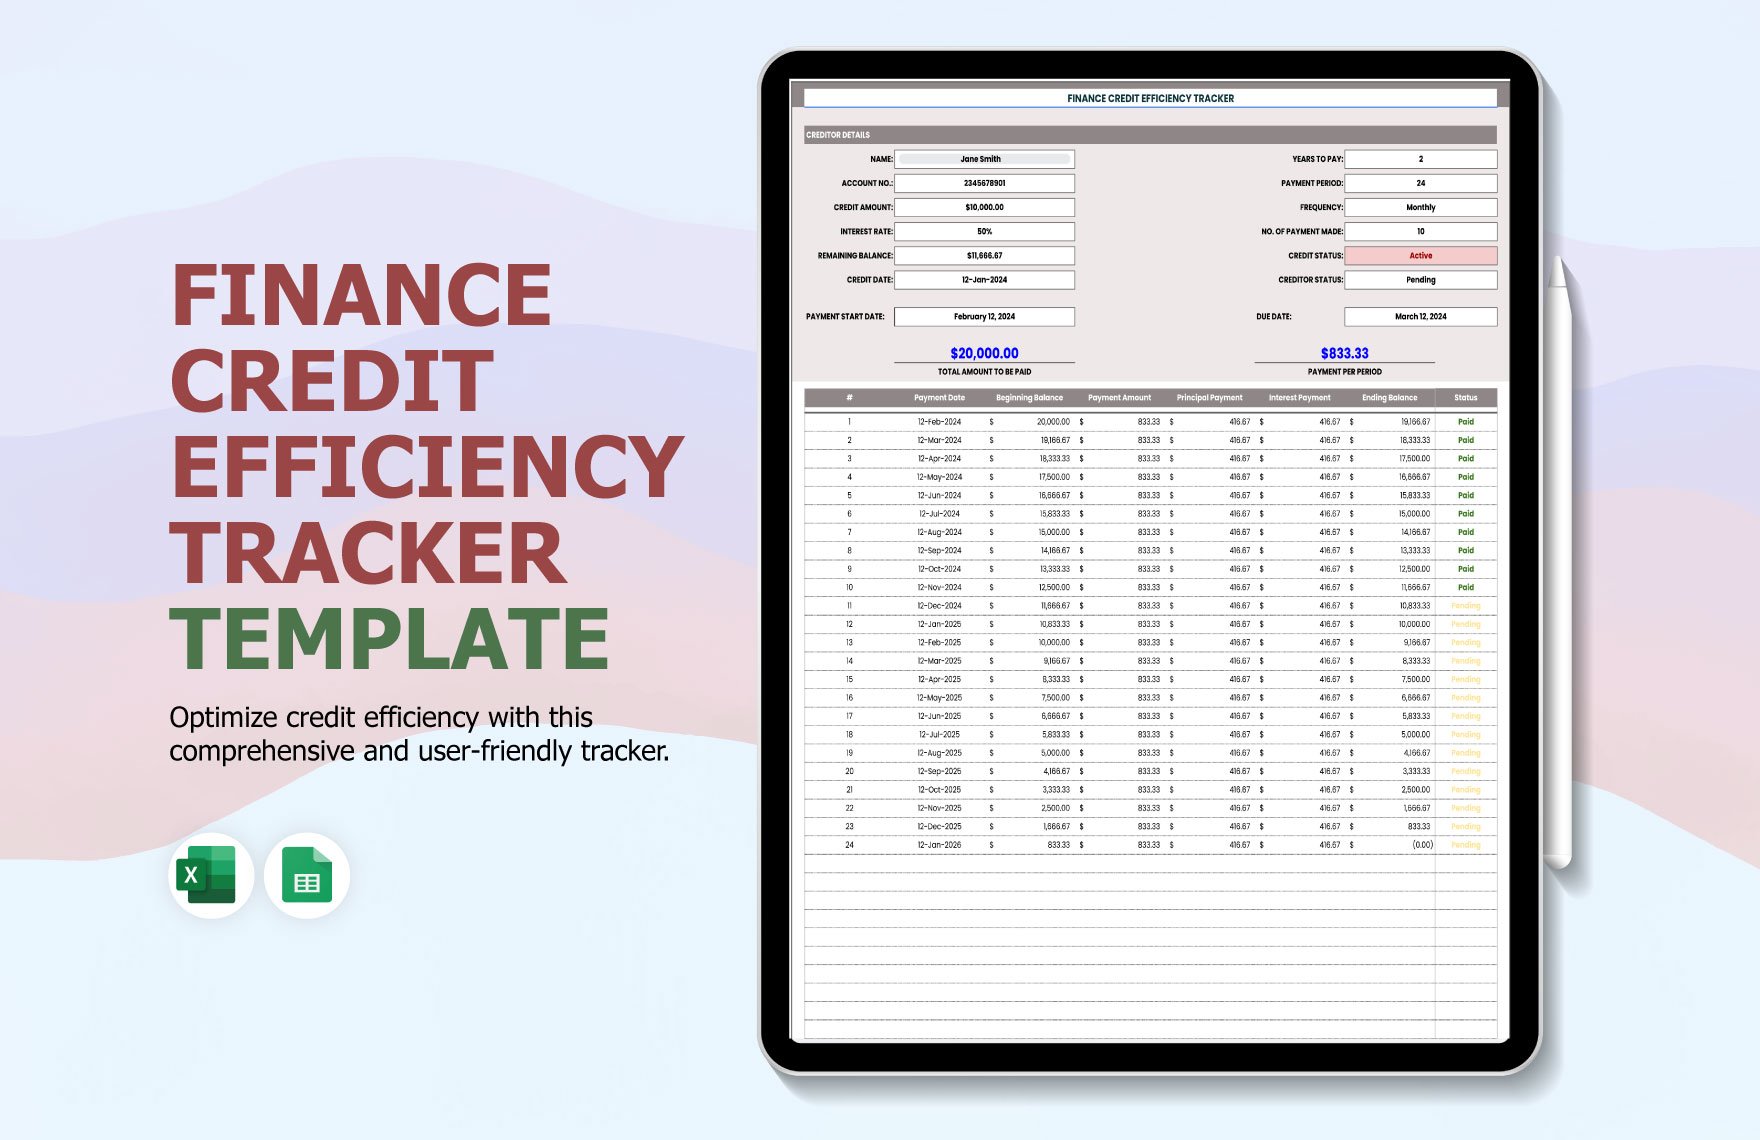 Finance Credit Efficiency Tracker Template in Excel, Google Sheets